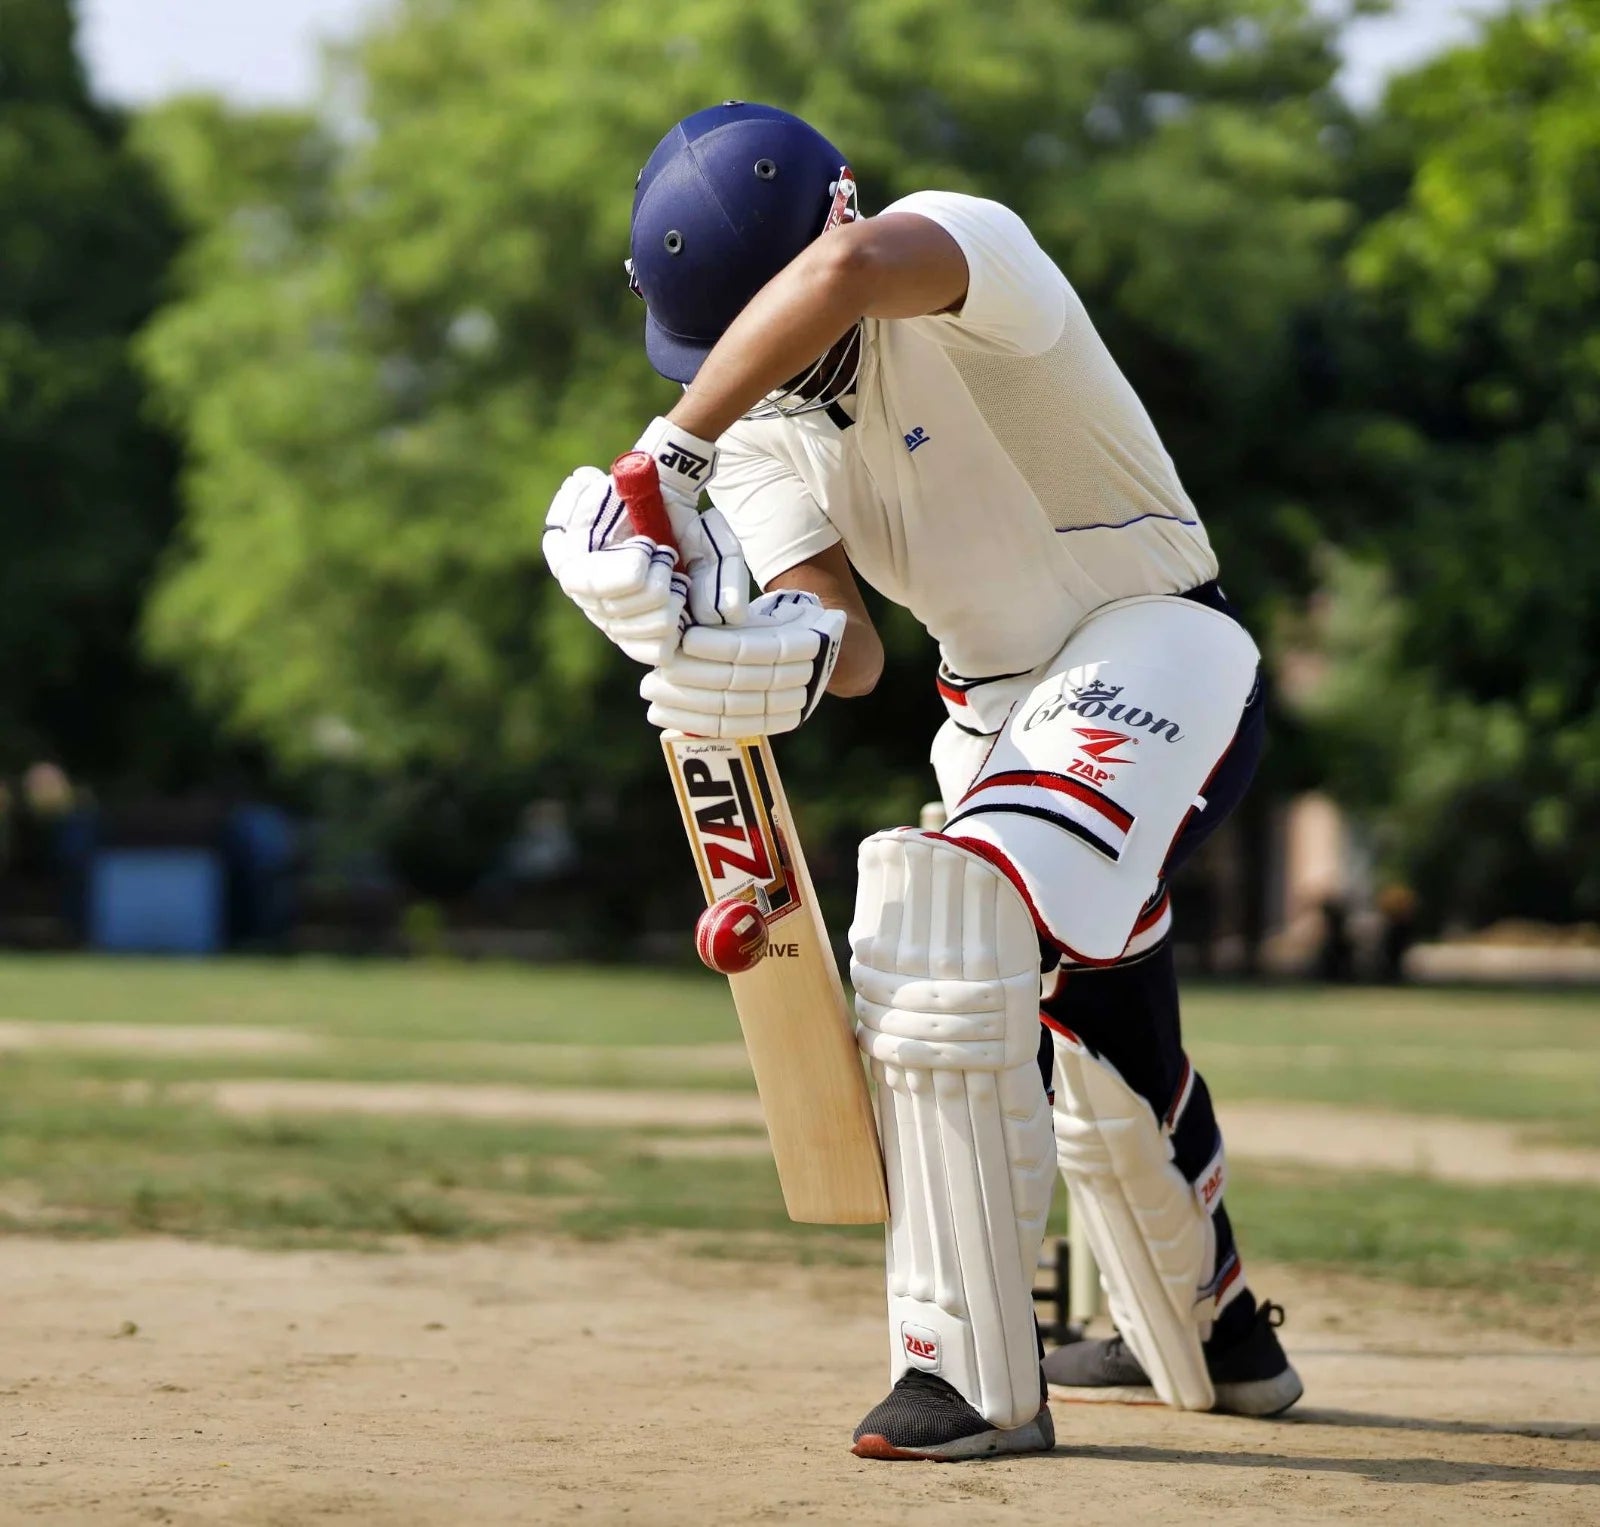 A ZAP Athlete bats with the entire ZAP Cricket Batting Protection: Pads, helmet, gloves, thigh pads